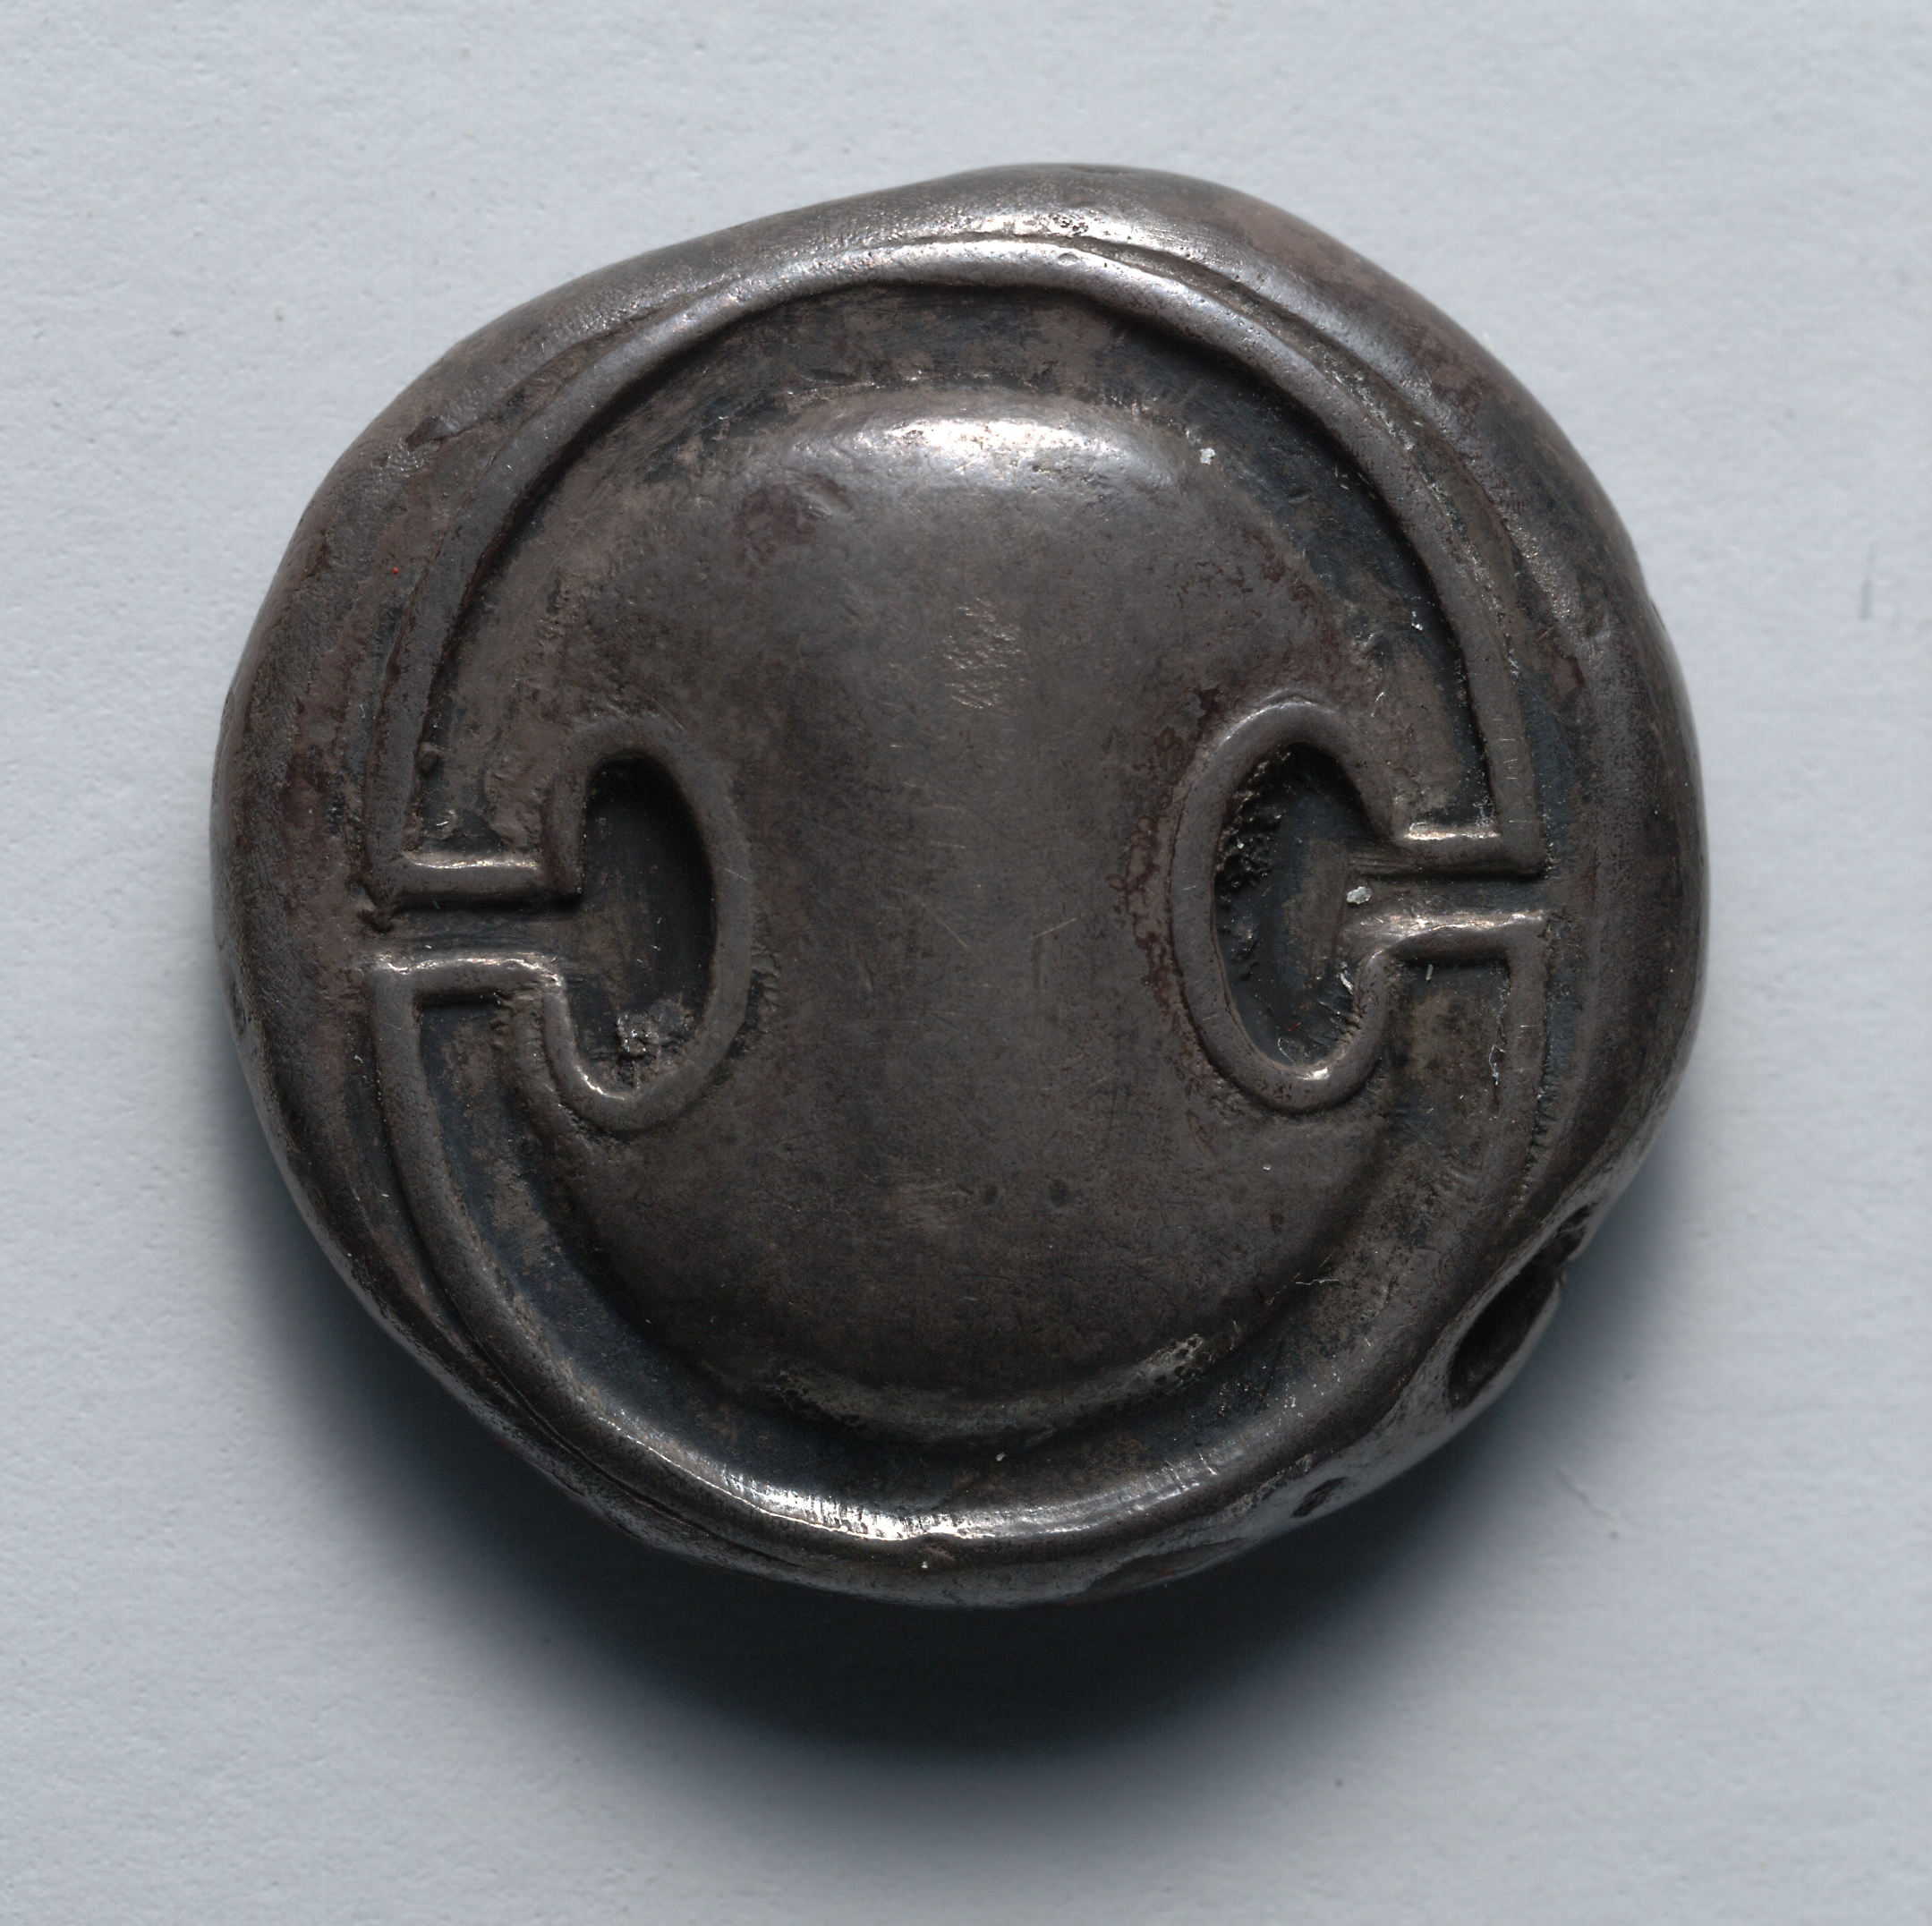 Stater: Boeotian Shield (obverse)